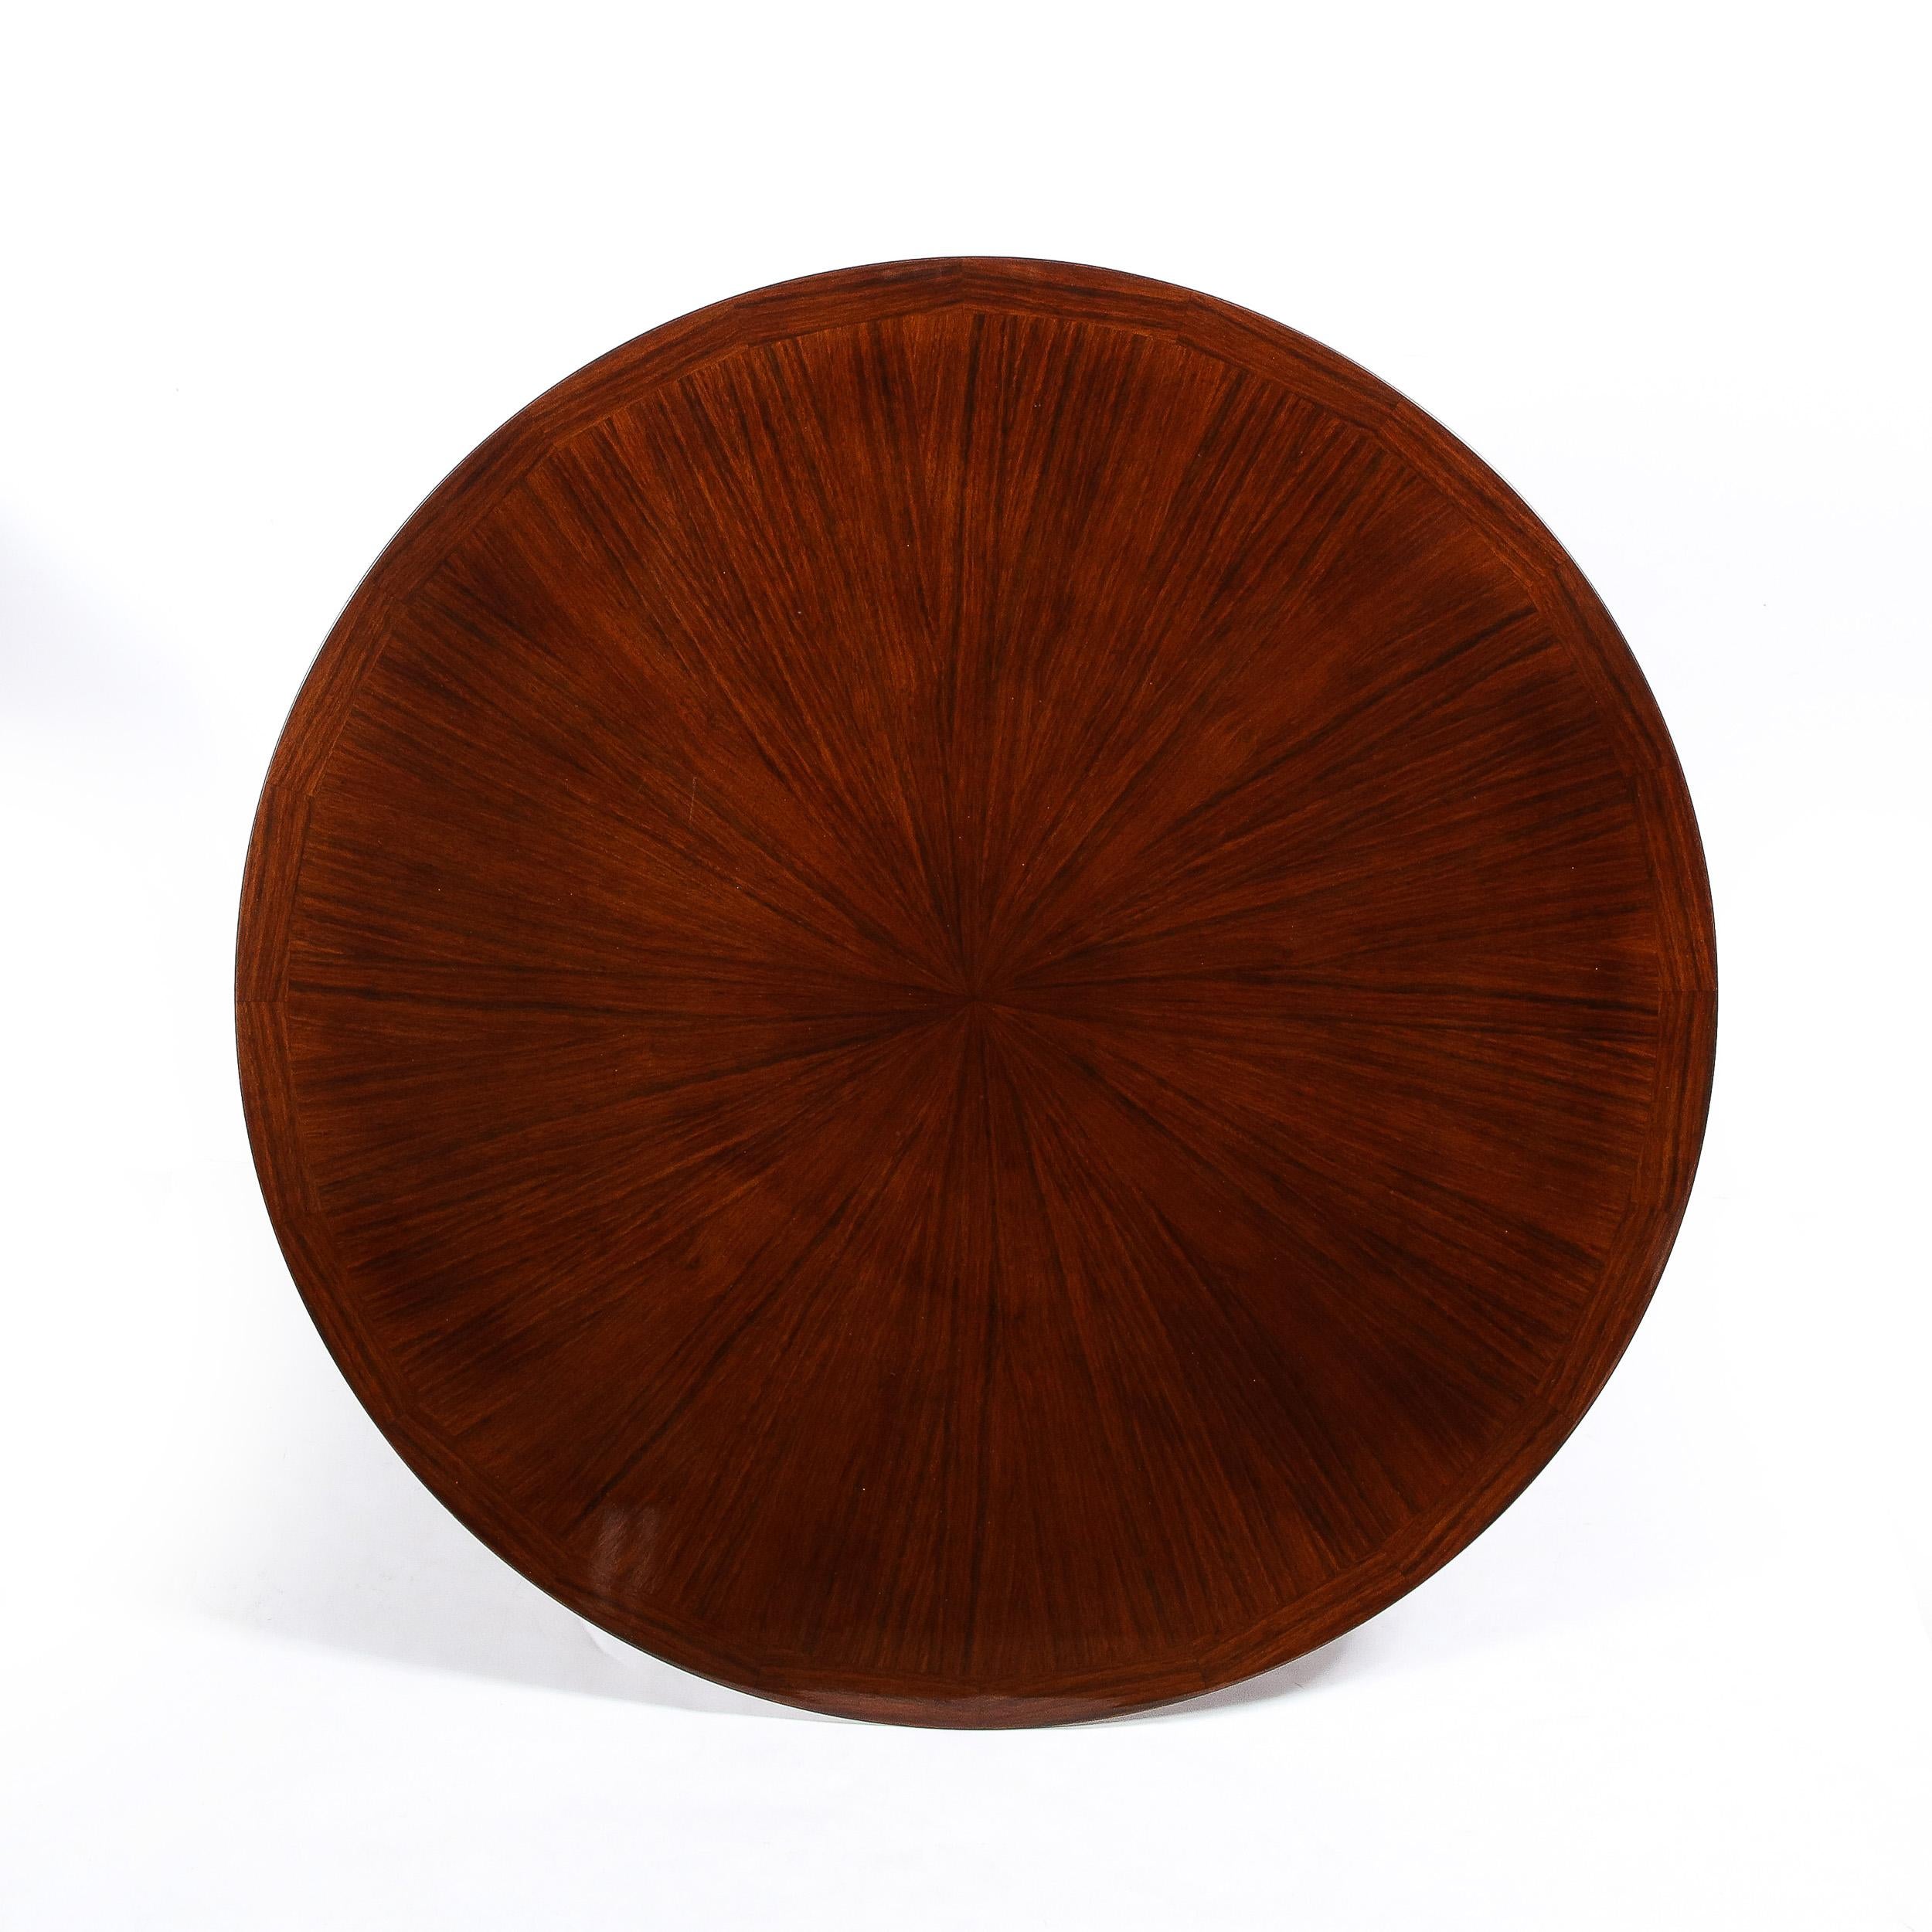 This stunning Art Deco Starburst Design Bookmatched Walnut Occasional Table by Jules Leleu originates from France, Circa 1930. A round topped beautifully proportioned occasional table featuring a book-matched starburst motif lined with a highly